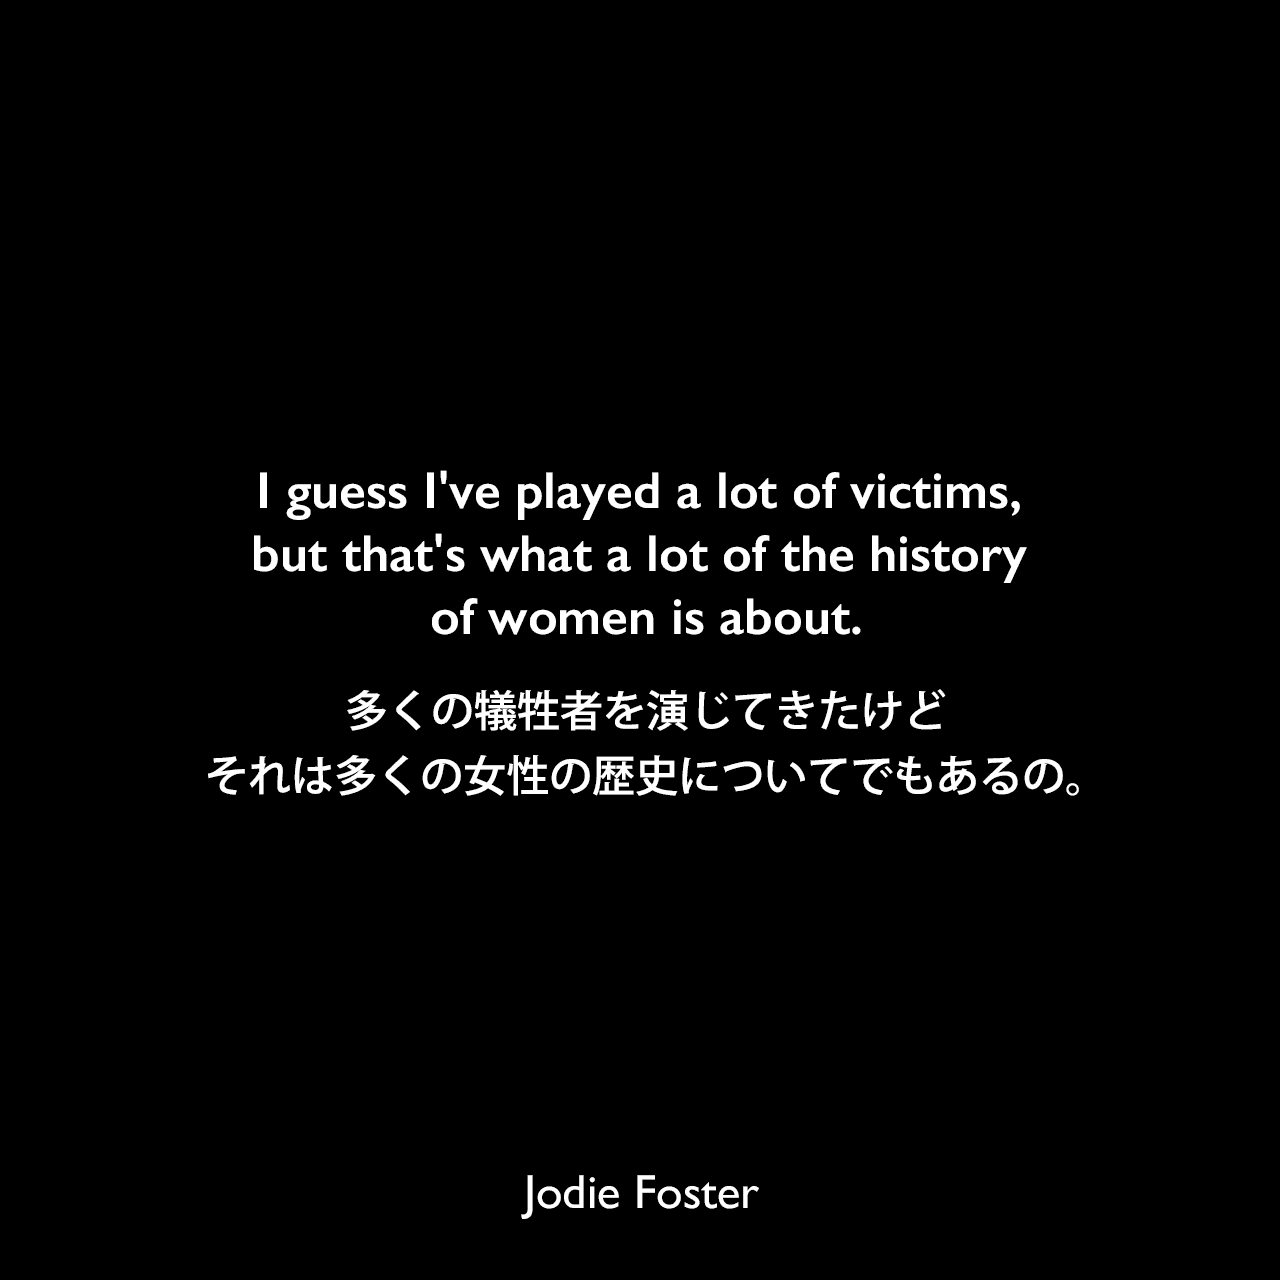 I guess I've played a lot of victims, but that's what a lot of the history of women is about.多くの犠牲者を演じてきたけど、それは多くの女性の歴史についてでもあるの。Jodie Foster